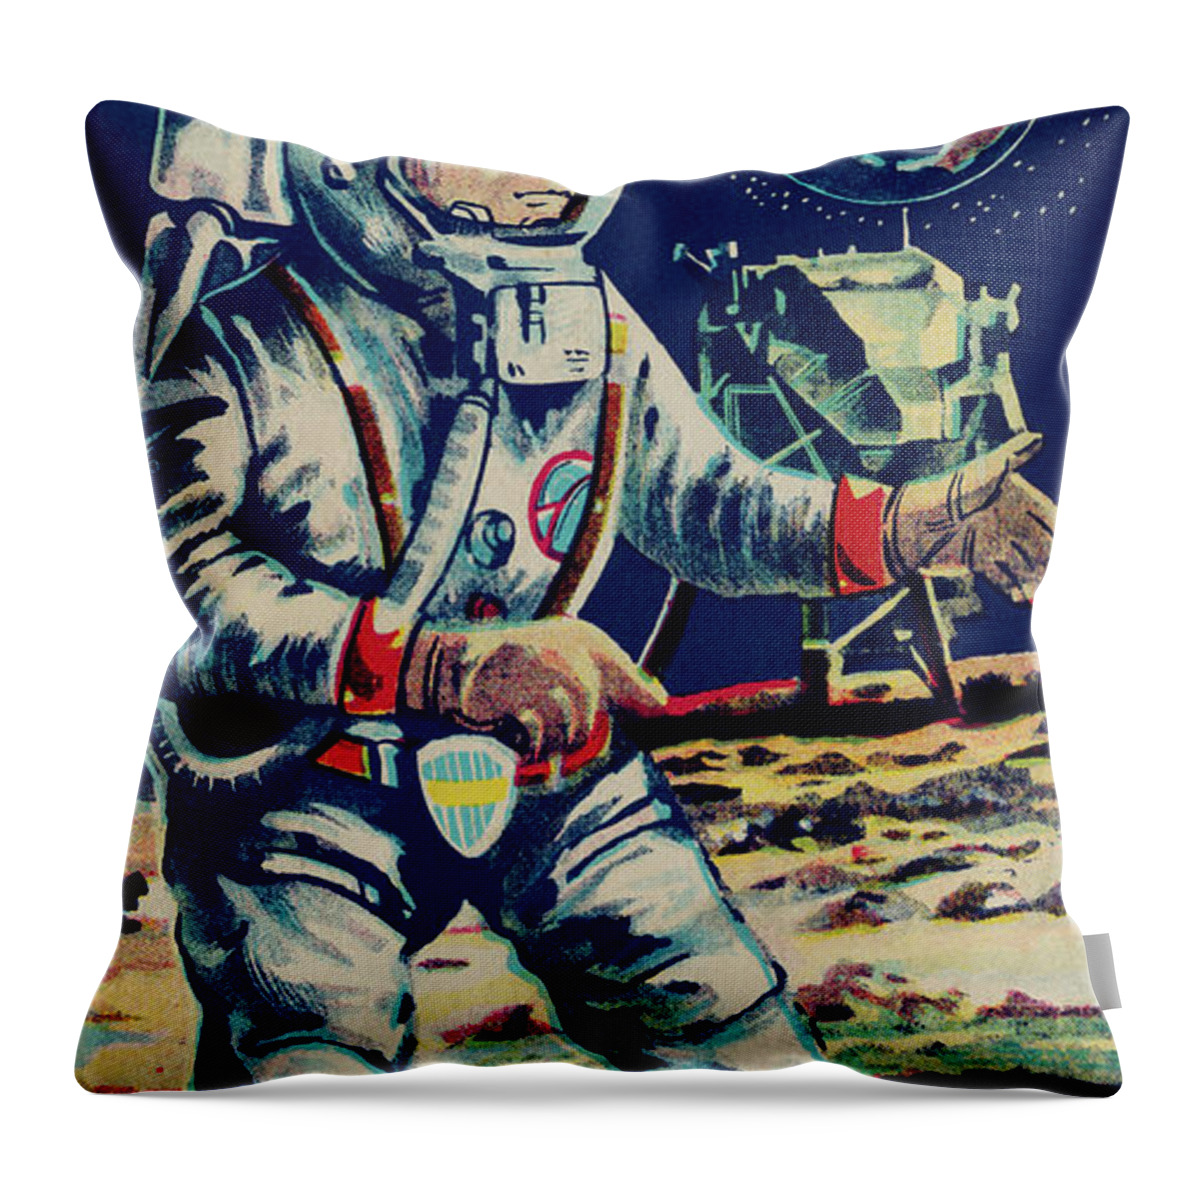 Vintage Toy Posters Throw Pillow featuring the drawing Moon Astronaut by Vintage Toy Posters